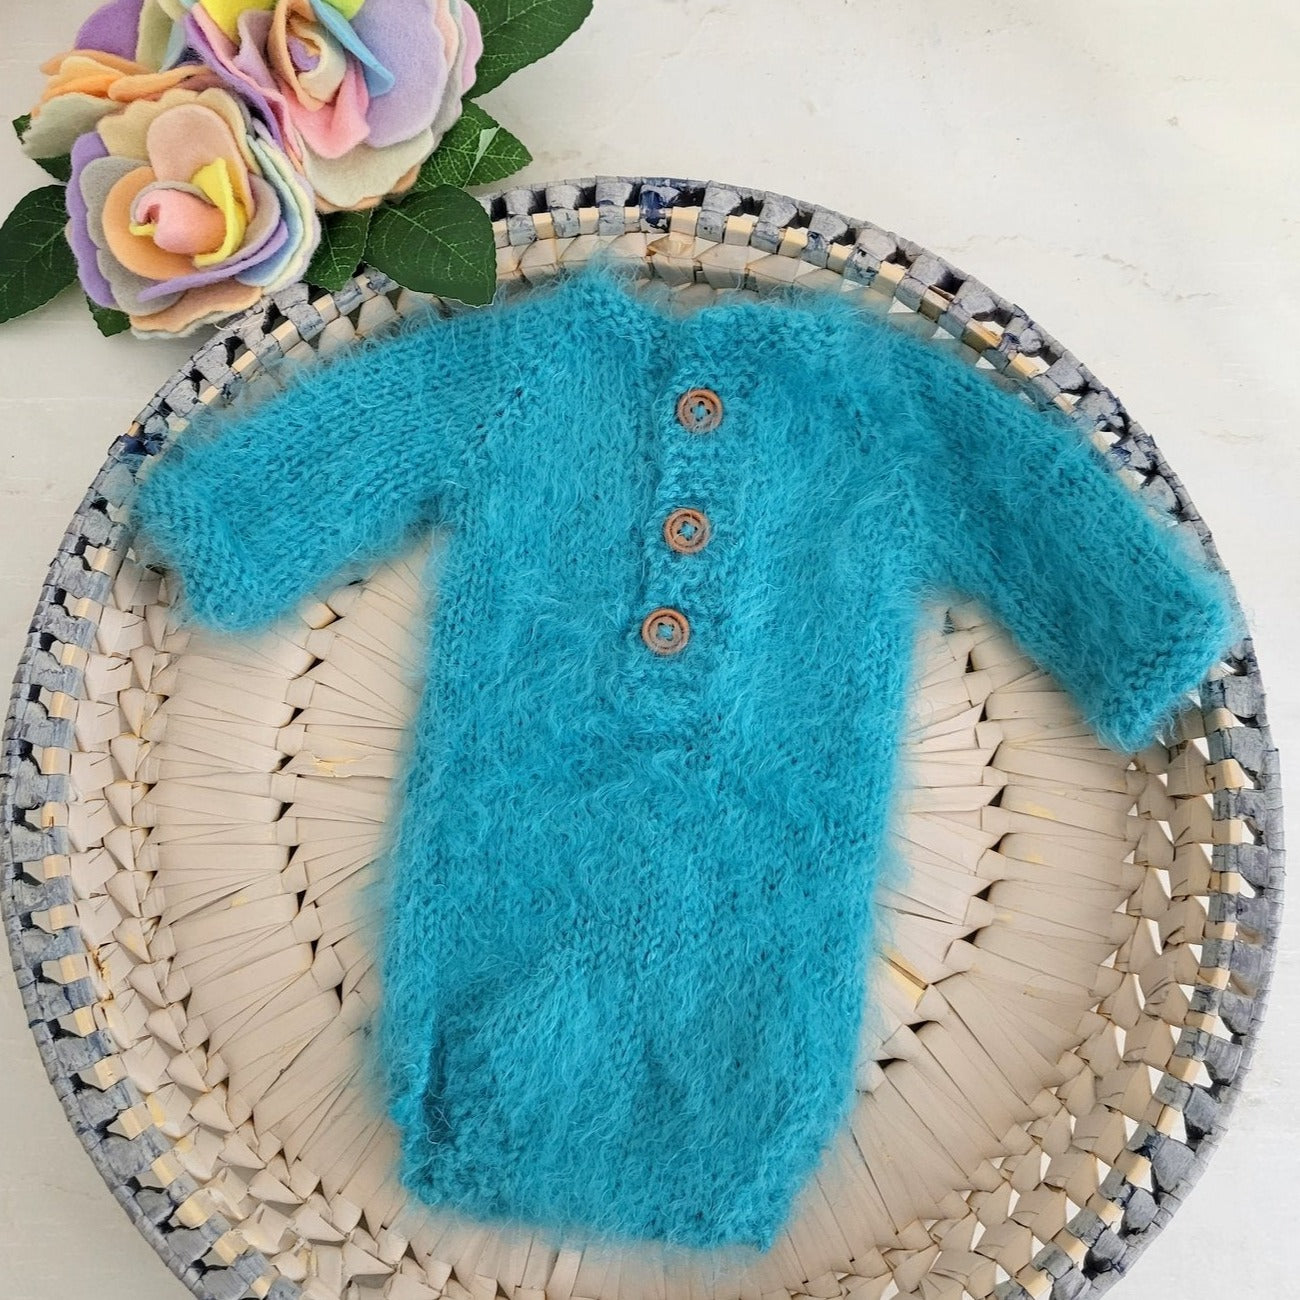 fluffy blue knitted long sleeved onesie romper for a newborn baby photo shoot